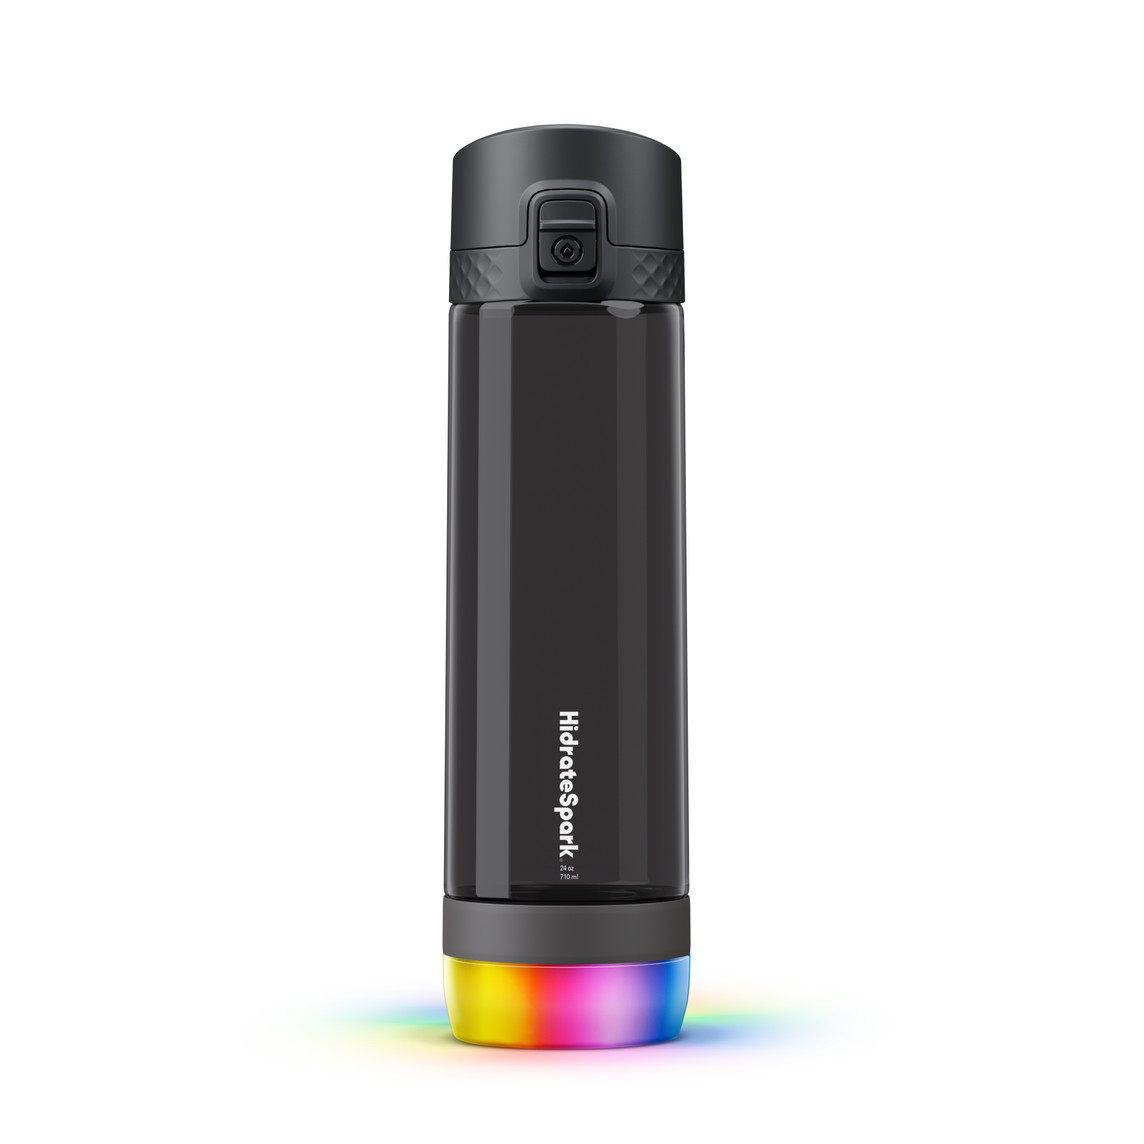 The black shatter-resistant, vacuum-insulated Hi-drateSpark PRO Titan Plastic Smart Water Bottle keeps a 24-ounce beverage cold up to 24 hours.